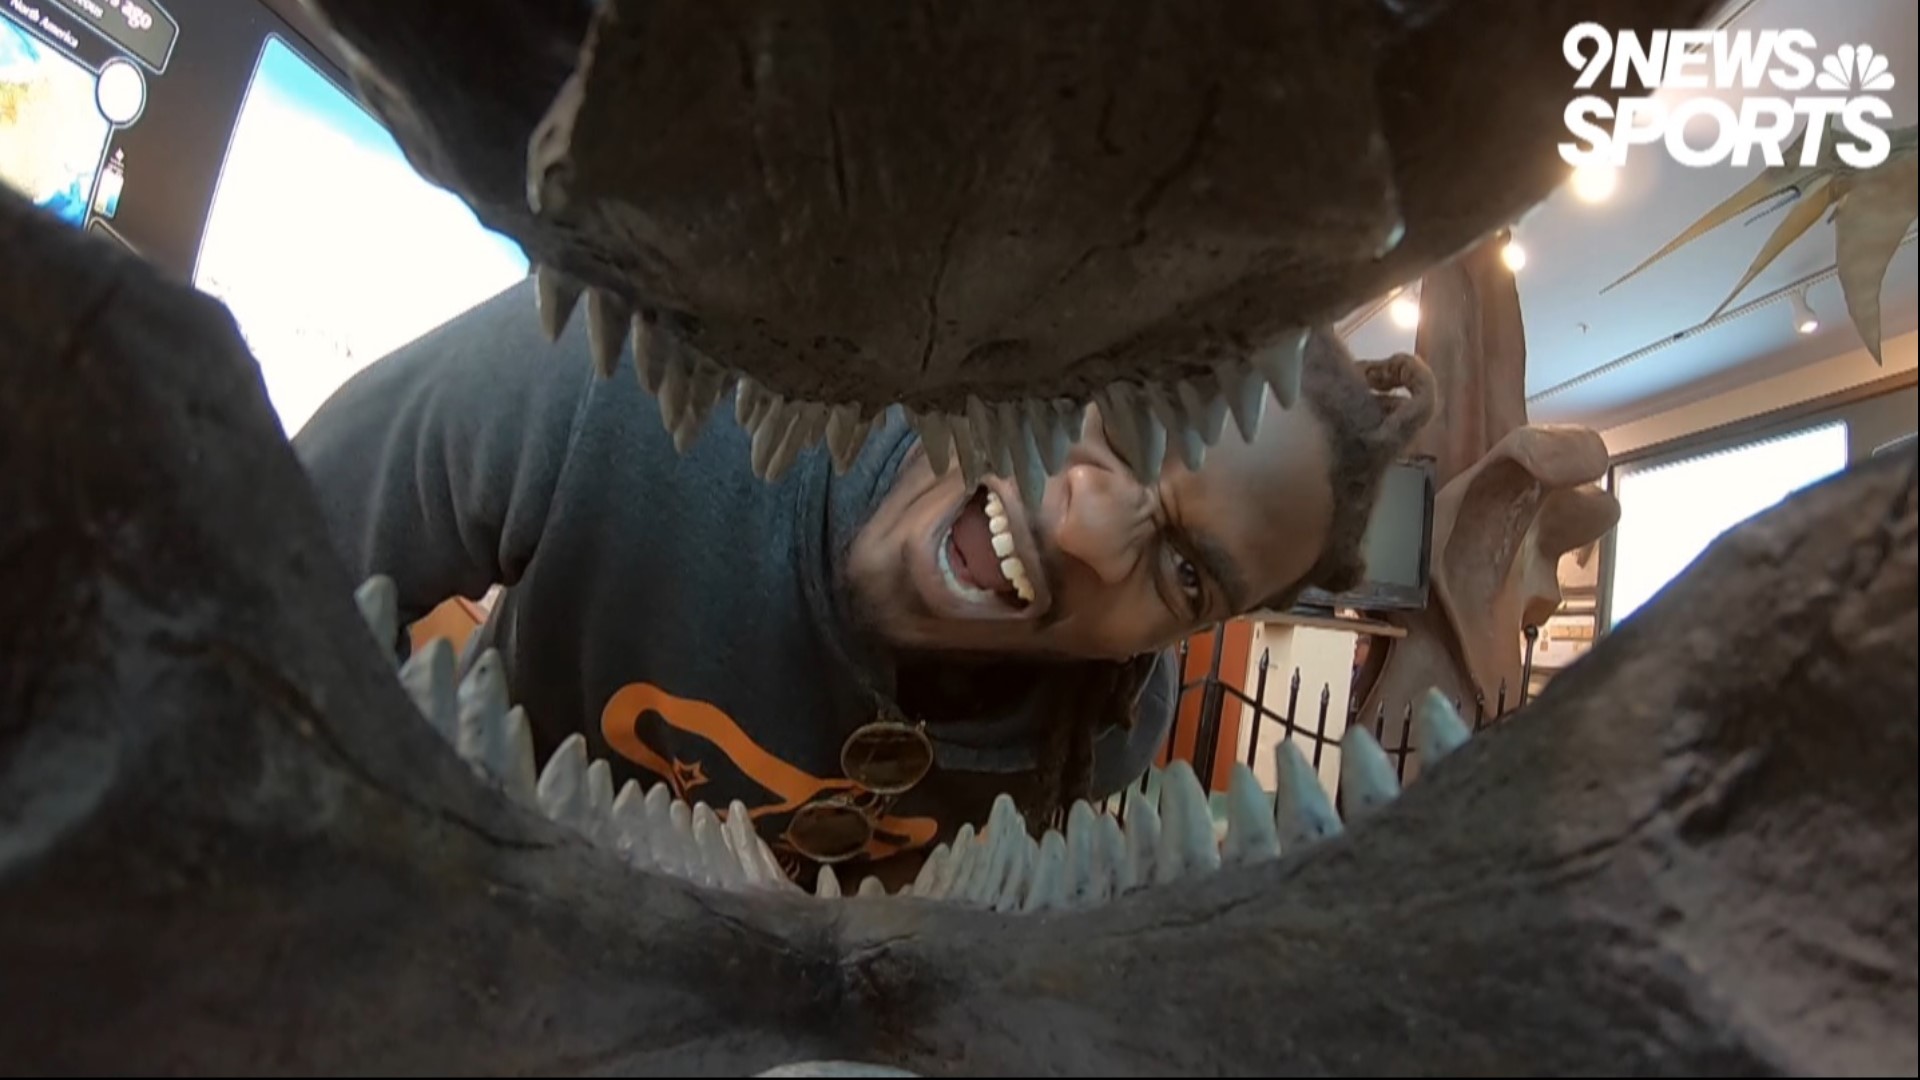 Denver Broncos linebacker Alexander Johnson loves dinosaurs, and took on "The Dino" as an alter ego in college.